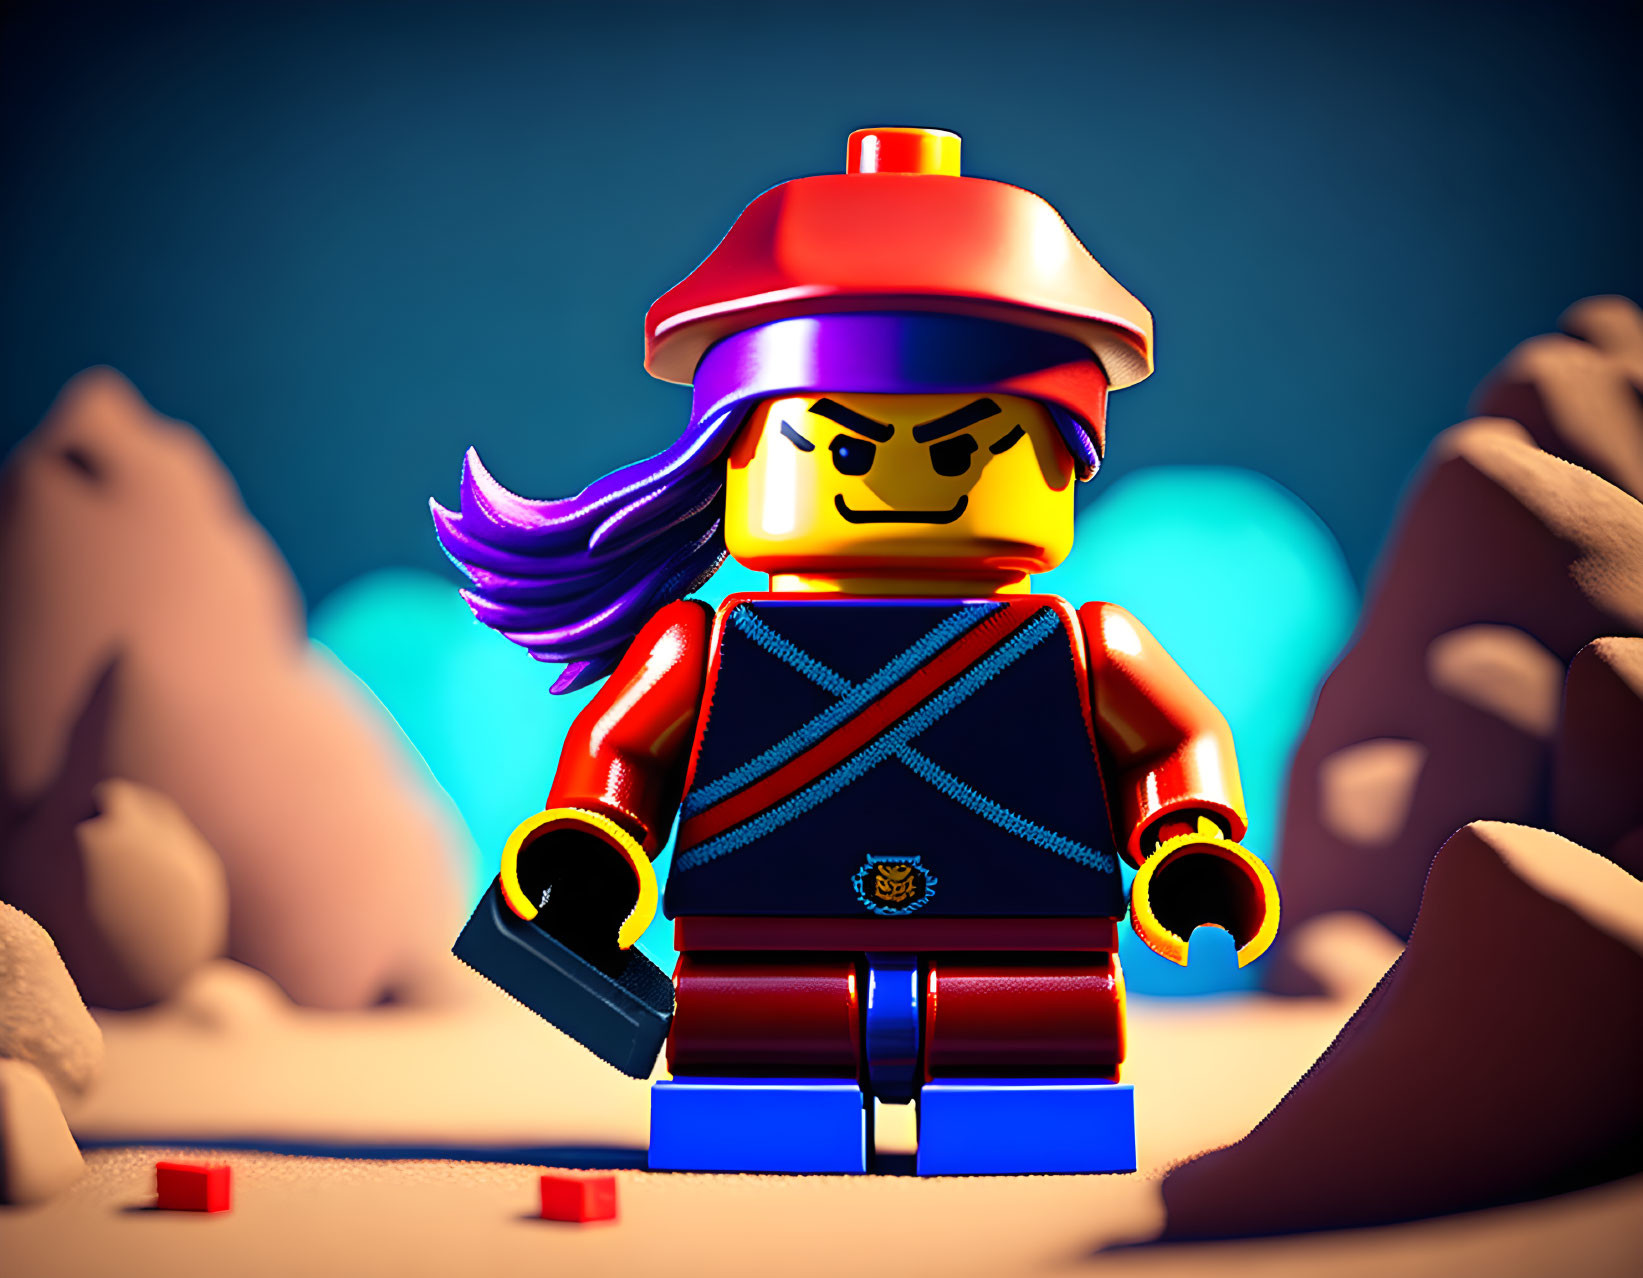 Pirate LEGO figurine with red hat and coat on sandy surface